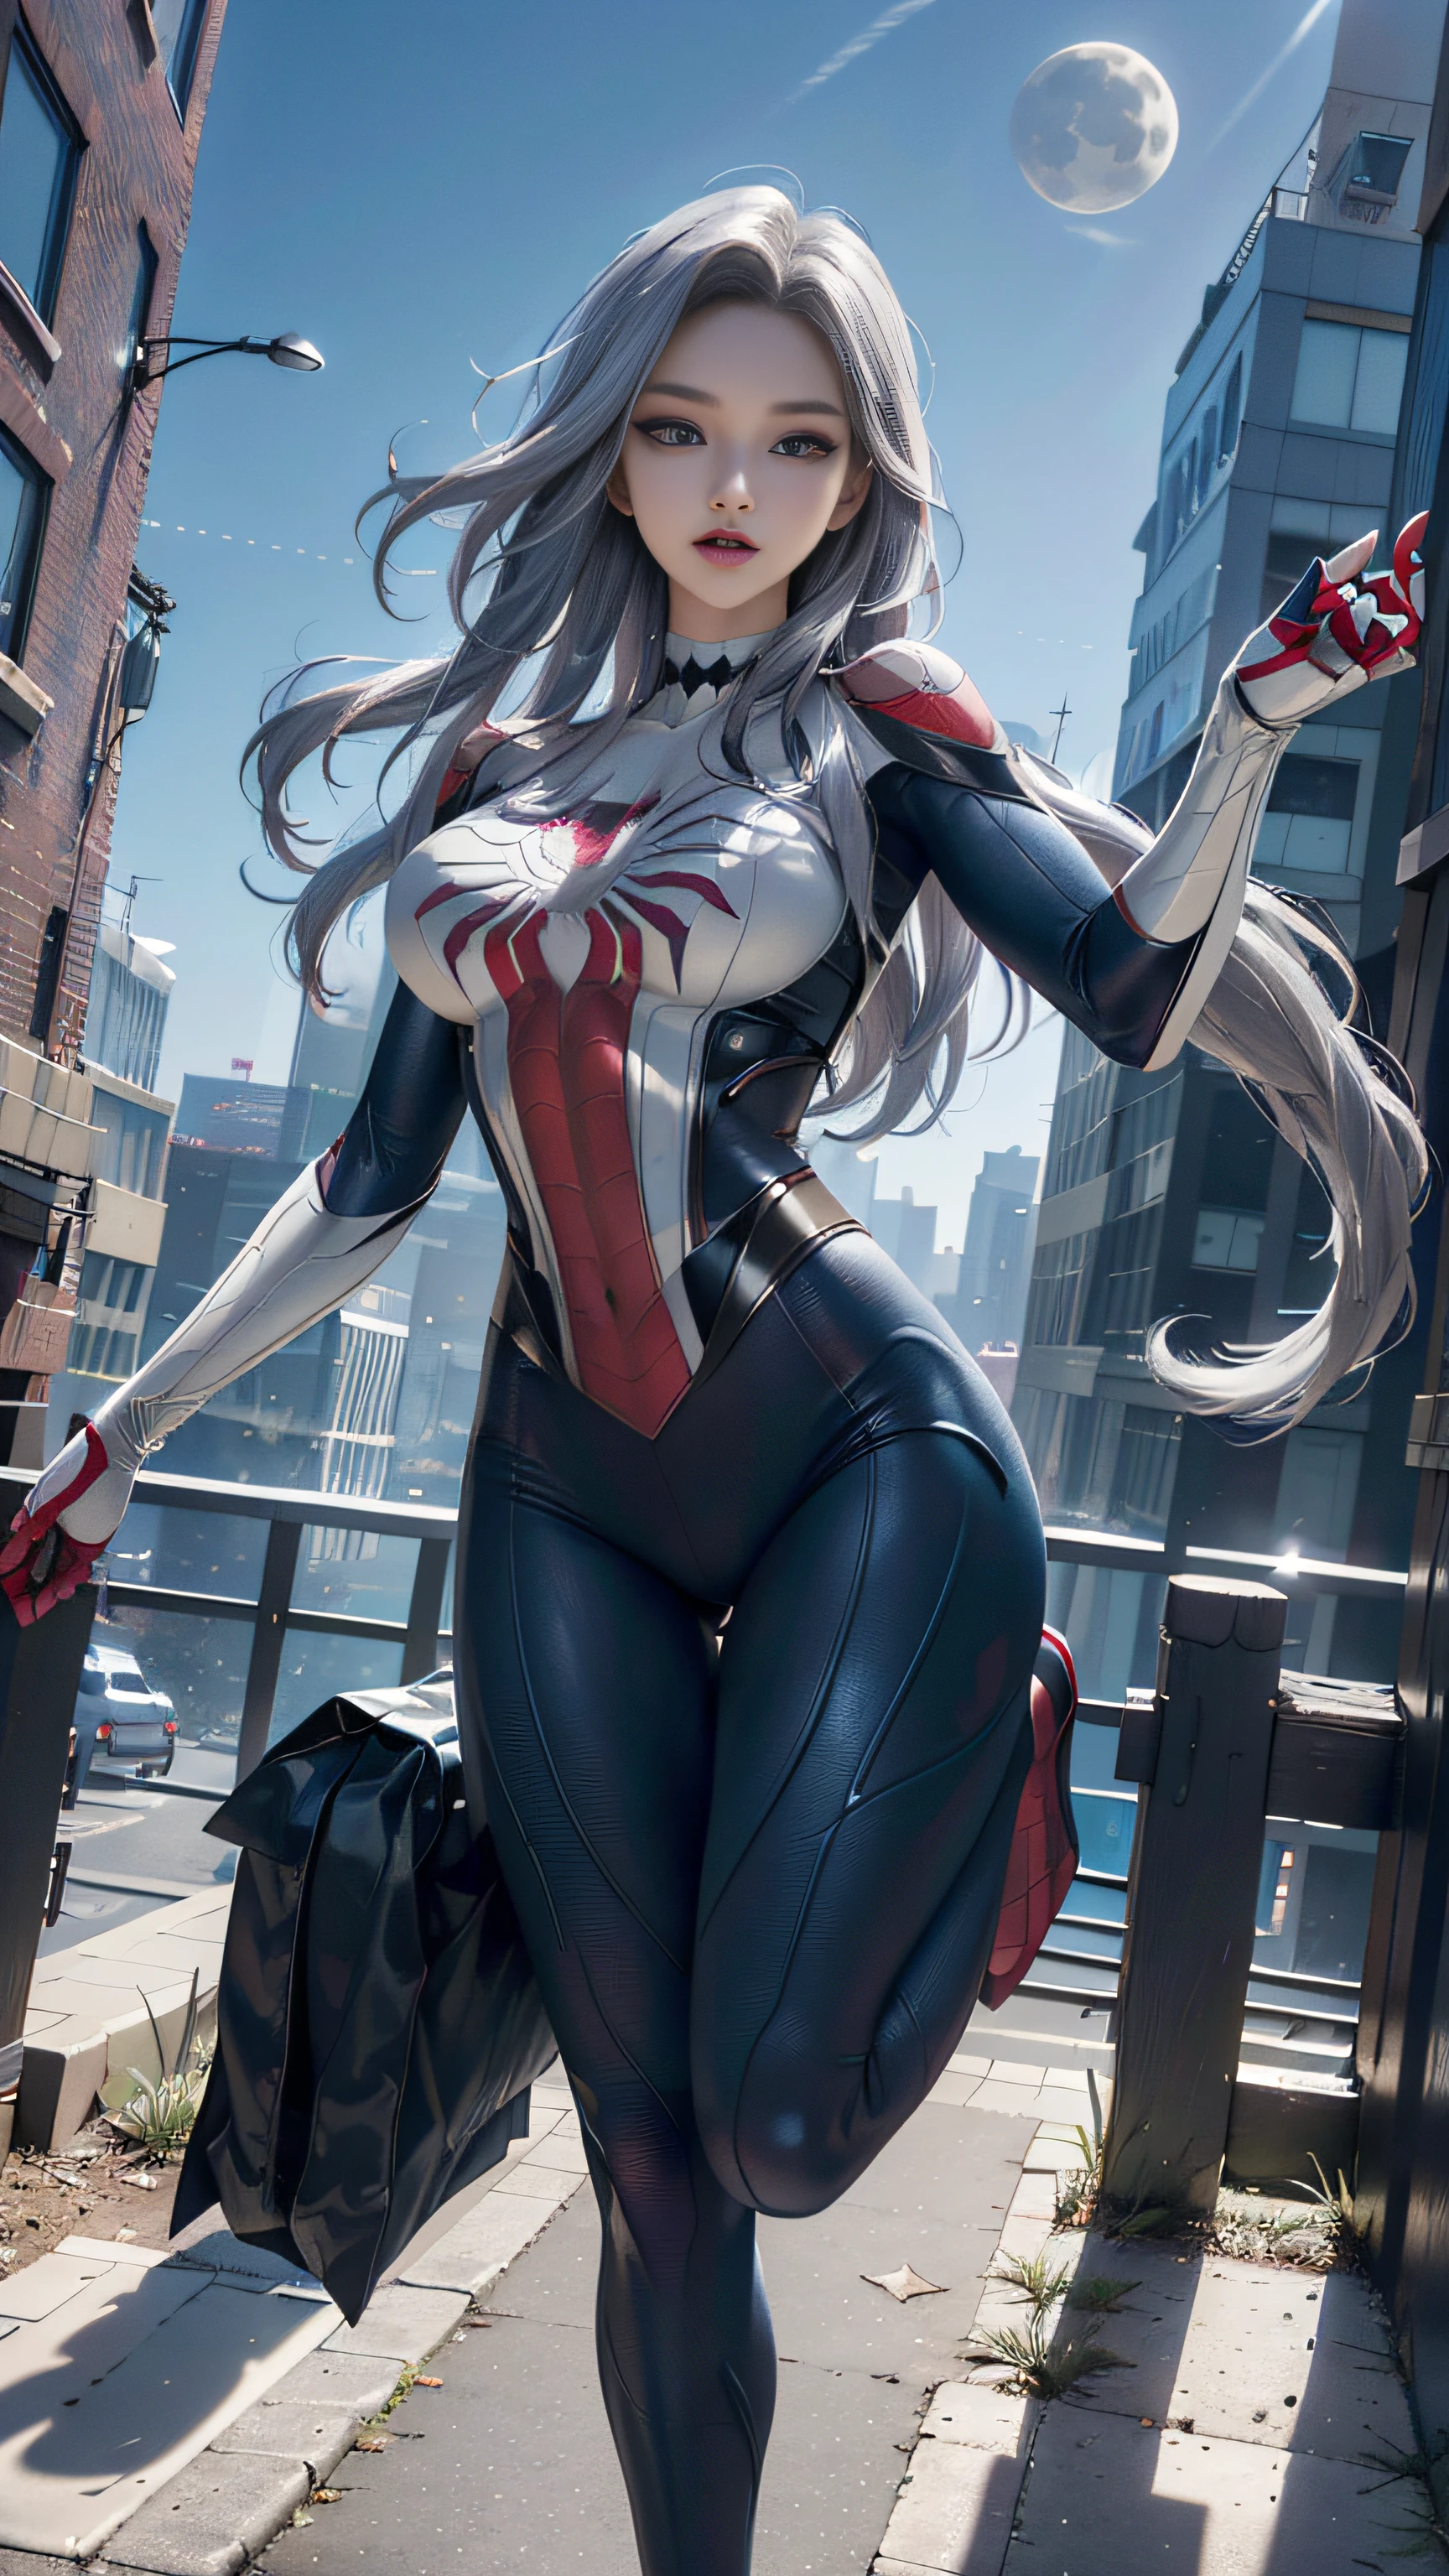 Super beautiful shining eyes、(​masterpiece、4K resolution、A hyper-realistic、ighly detailed)、(White Superhero Theme、Charisma、There's a girl in a Spider-Man costume over town、She's a superhero)、 [((17 age)、(Long grey hair:1.2)、A half body、(blue eyess:1.2)、((Spider-Man pose)、show of strength、Jump from one building to another)、((Sandy urban environment):0.8)|(A city scape、natta、Dinamic Light)、(fullmoon)]#illustrate:Prompts are mainly ultra high definition、very real、Describes highly detailed 4K paintings。A superheroine in a Spider-Man costume is depicted at the top of the city。The theme of the picture is white superhero theme、The female protagonist has long white hair and、At the age of 25、Her whole body is shown in the painting。In terms of depicting the actions of superheroines、Spiders are employed